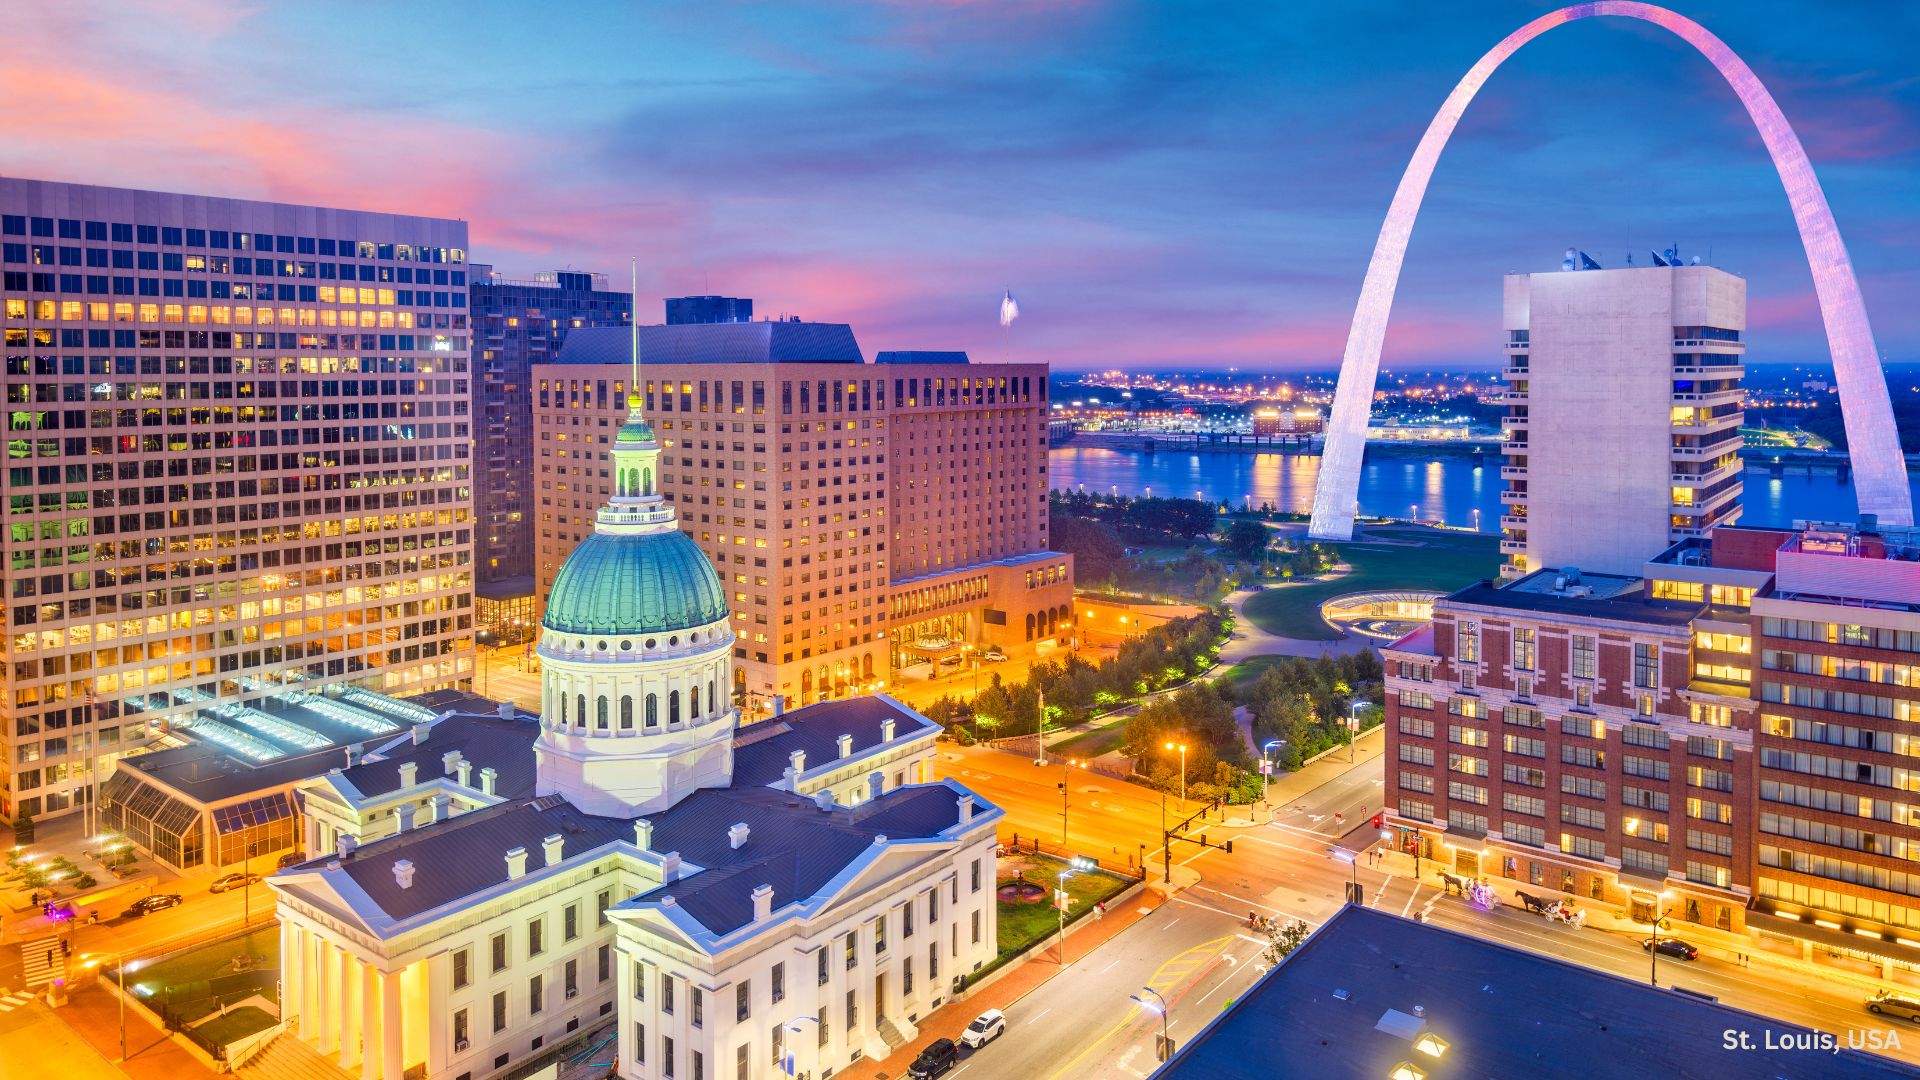 St. Louis, USA - 10 Most Affordable Cities in the World for Housing